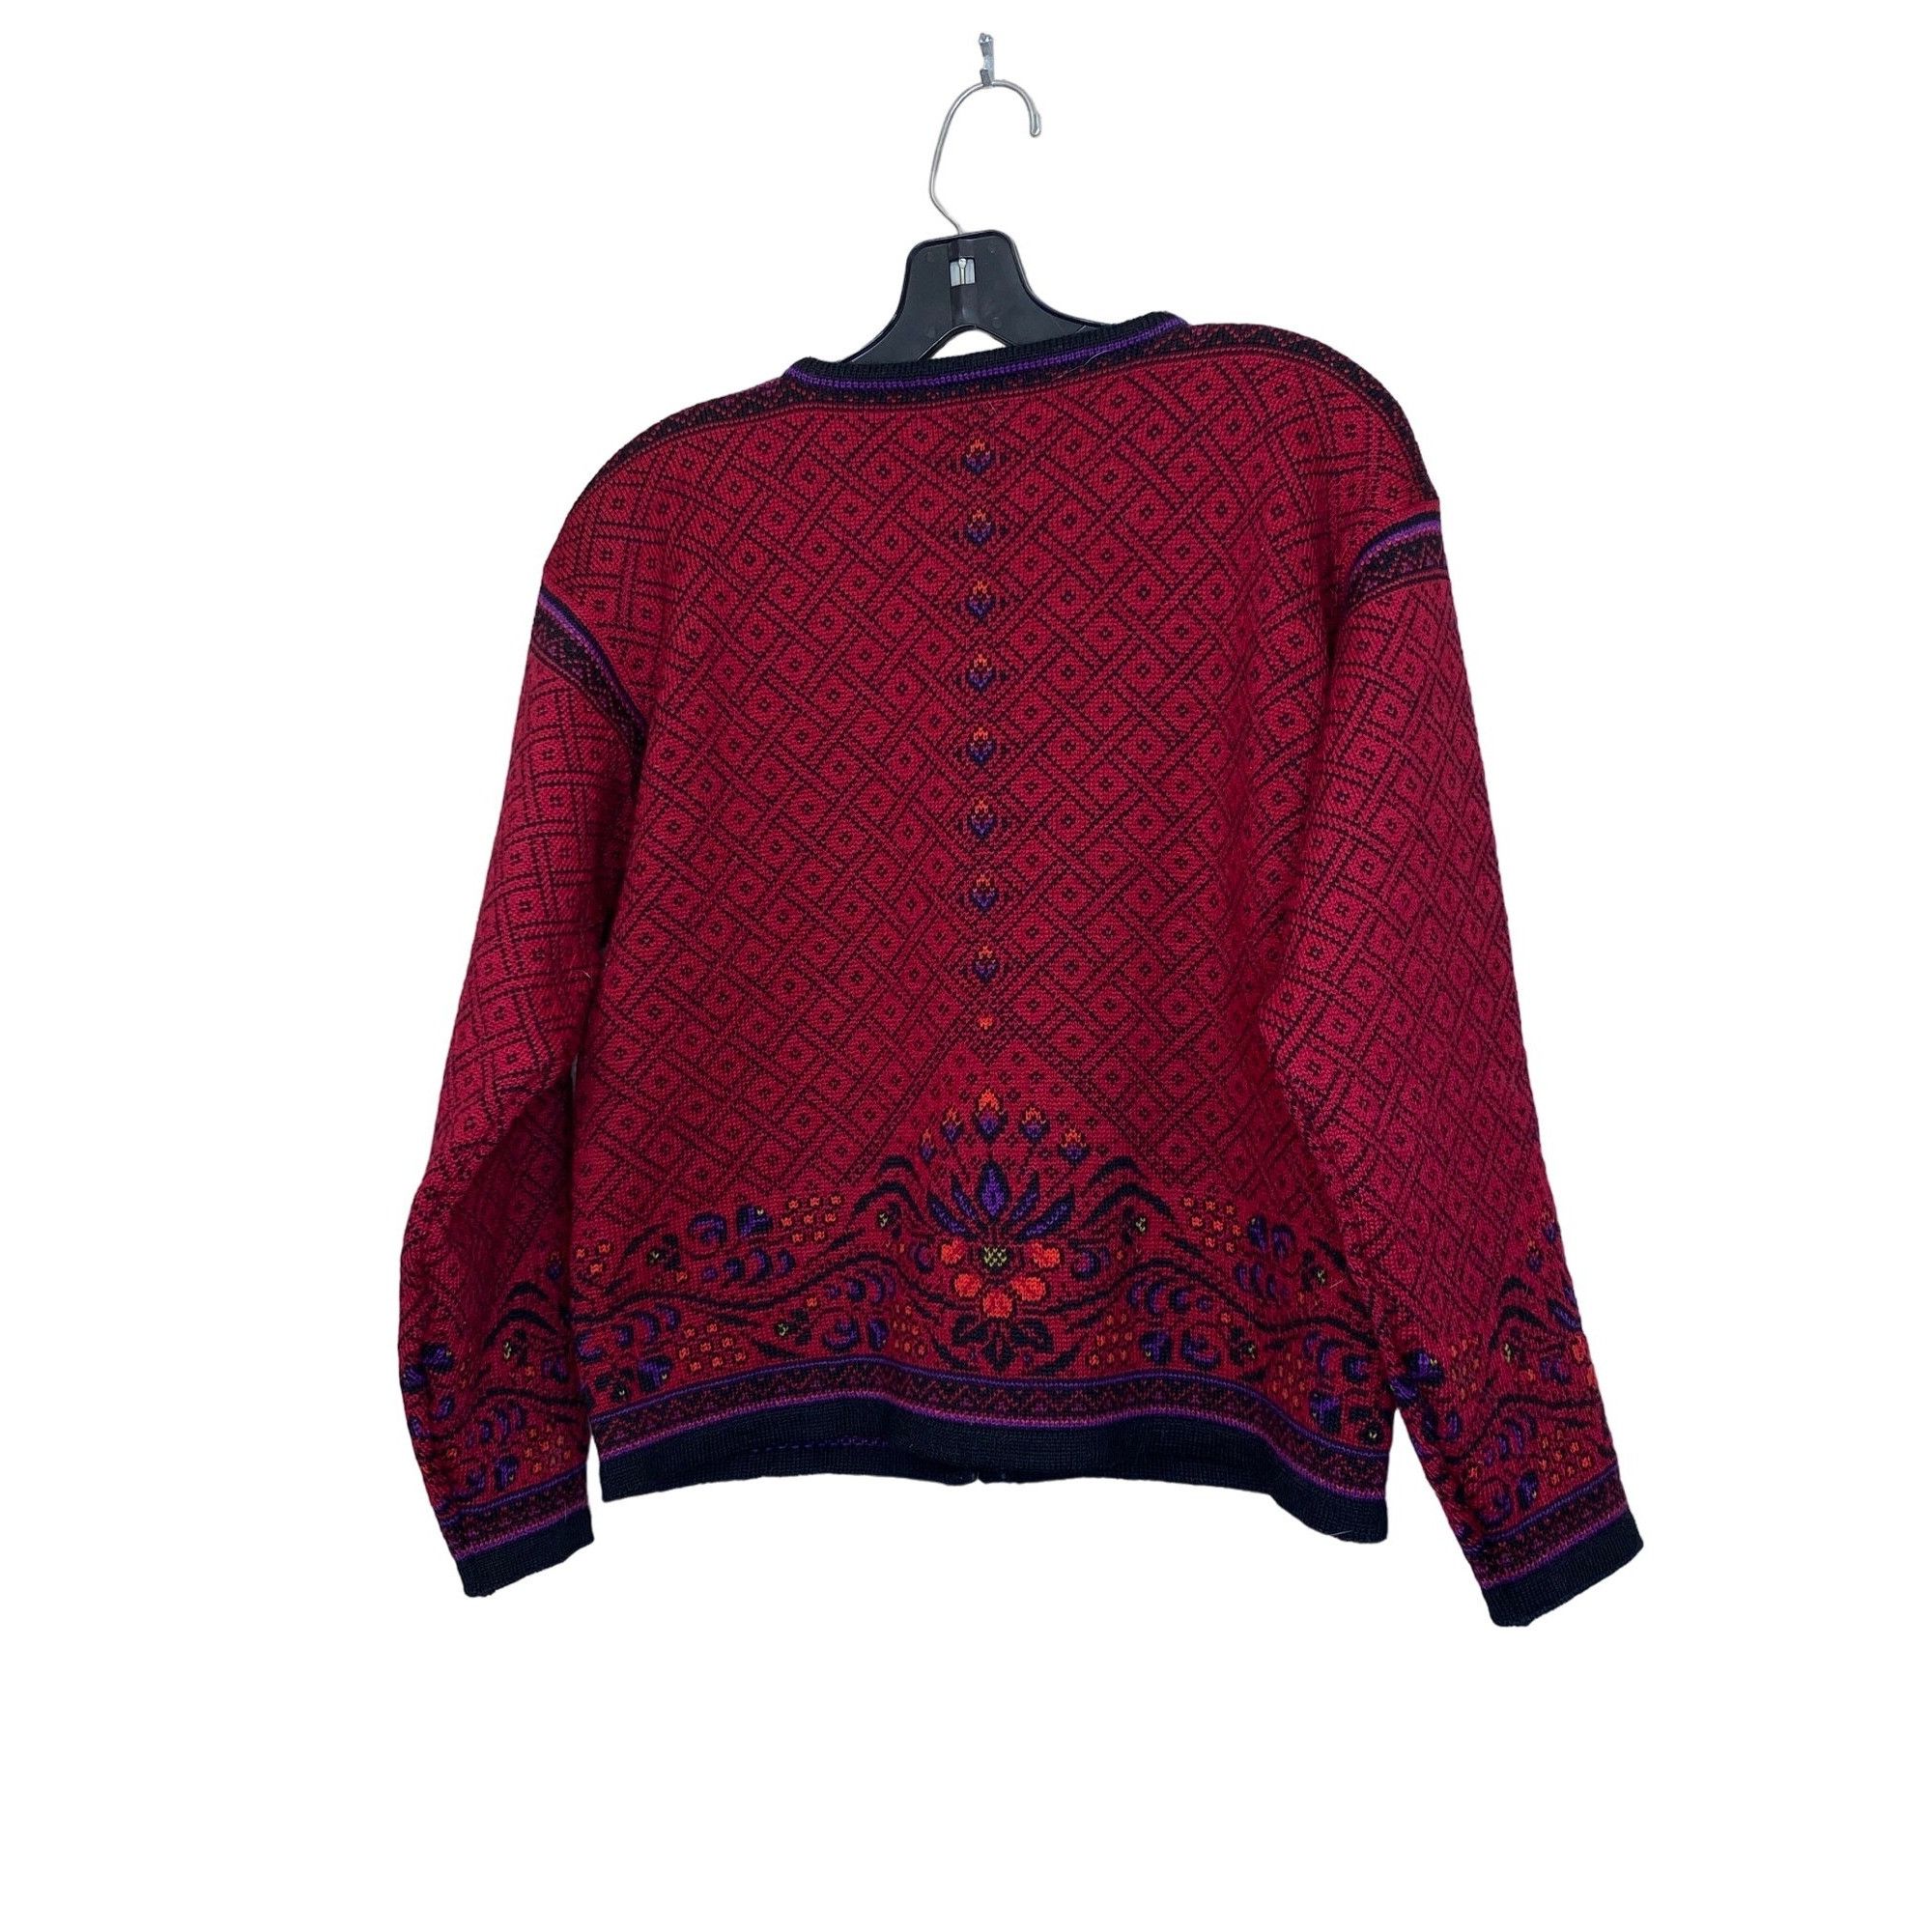 Dale Of Norway Dale of Norway Wool Cardigan Sweater Red Purple Pewter Butto Size M / US 6-8 / IT 42-44 - 5 Thumbnail